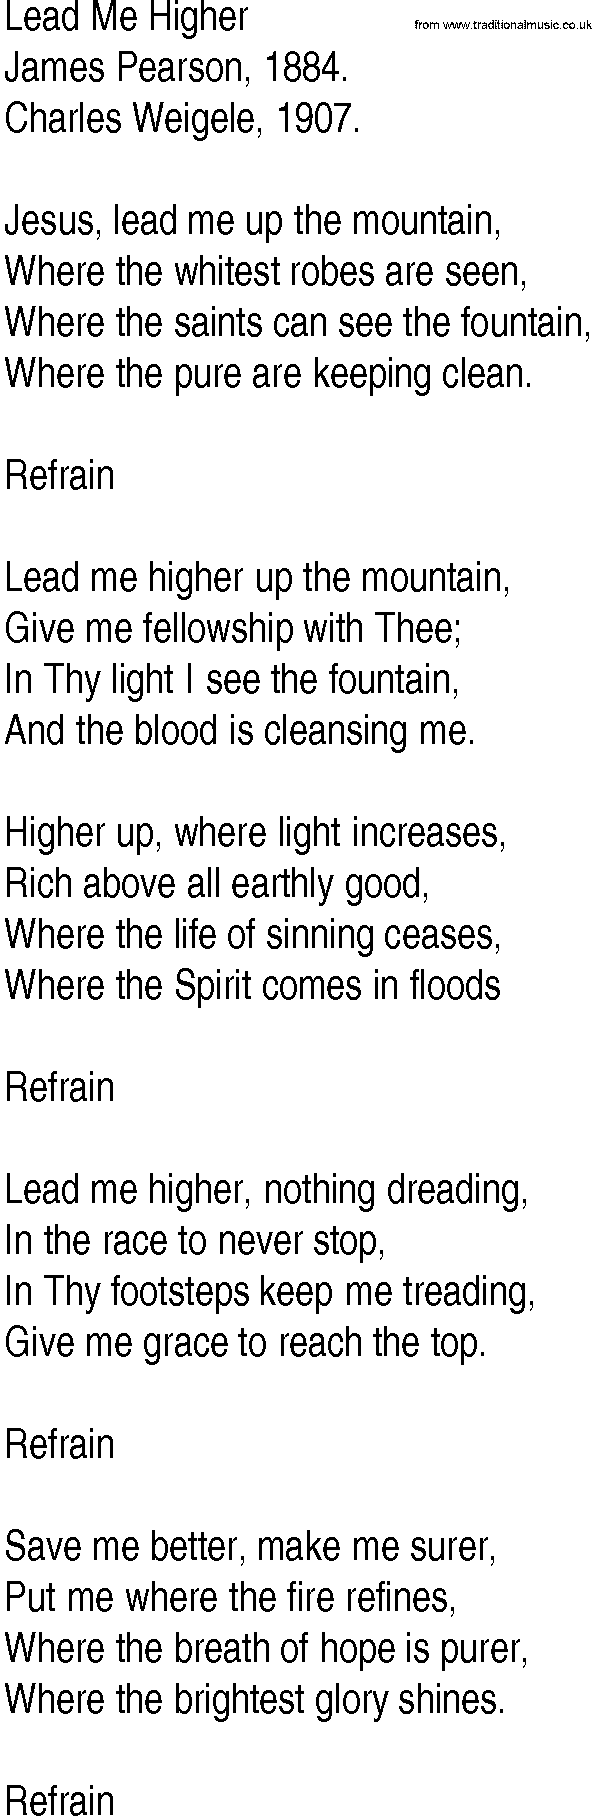 Hymn and Gospel Song: Lead Me Higher by James Pearson lyrics